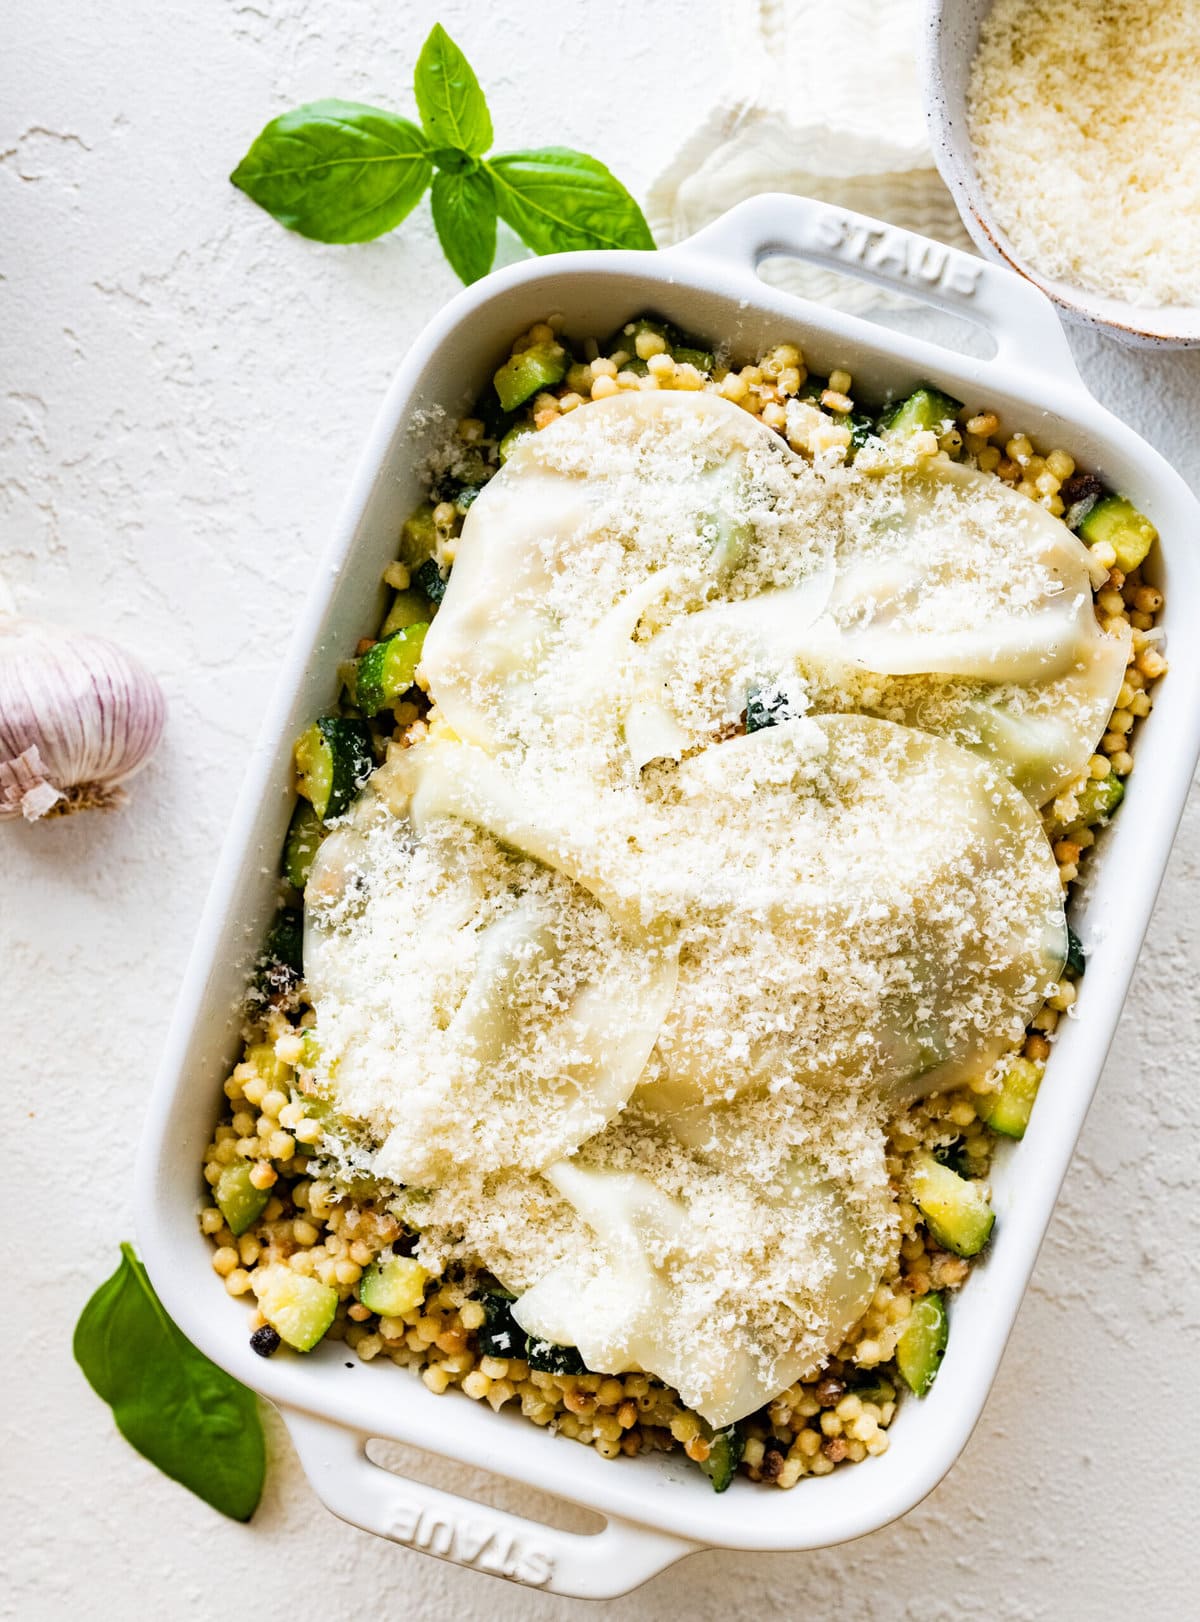 Step by step instructions Fregola Sarda Pasta Recipe with Zucchini and Cheese- Add final layer of cheese before baking.